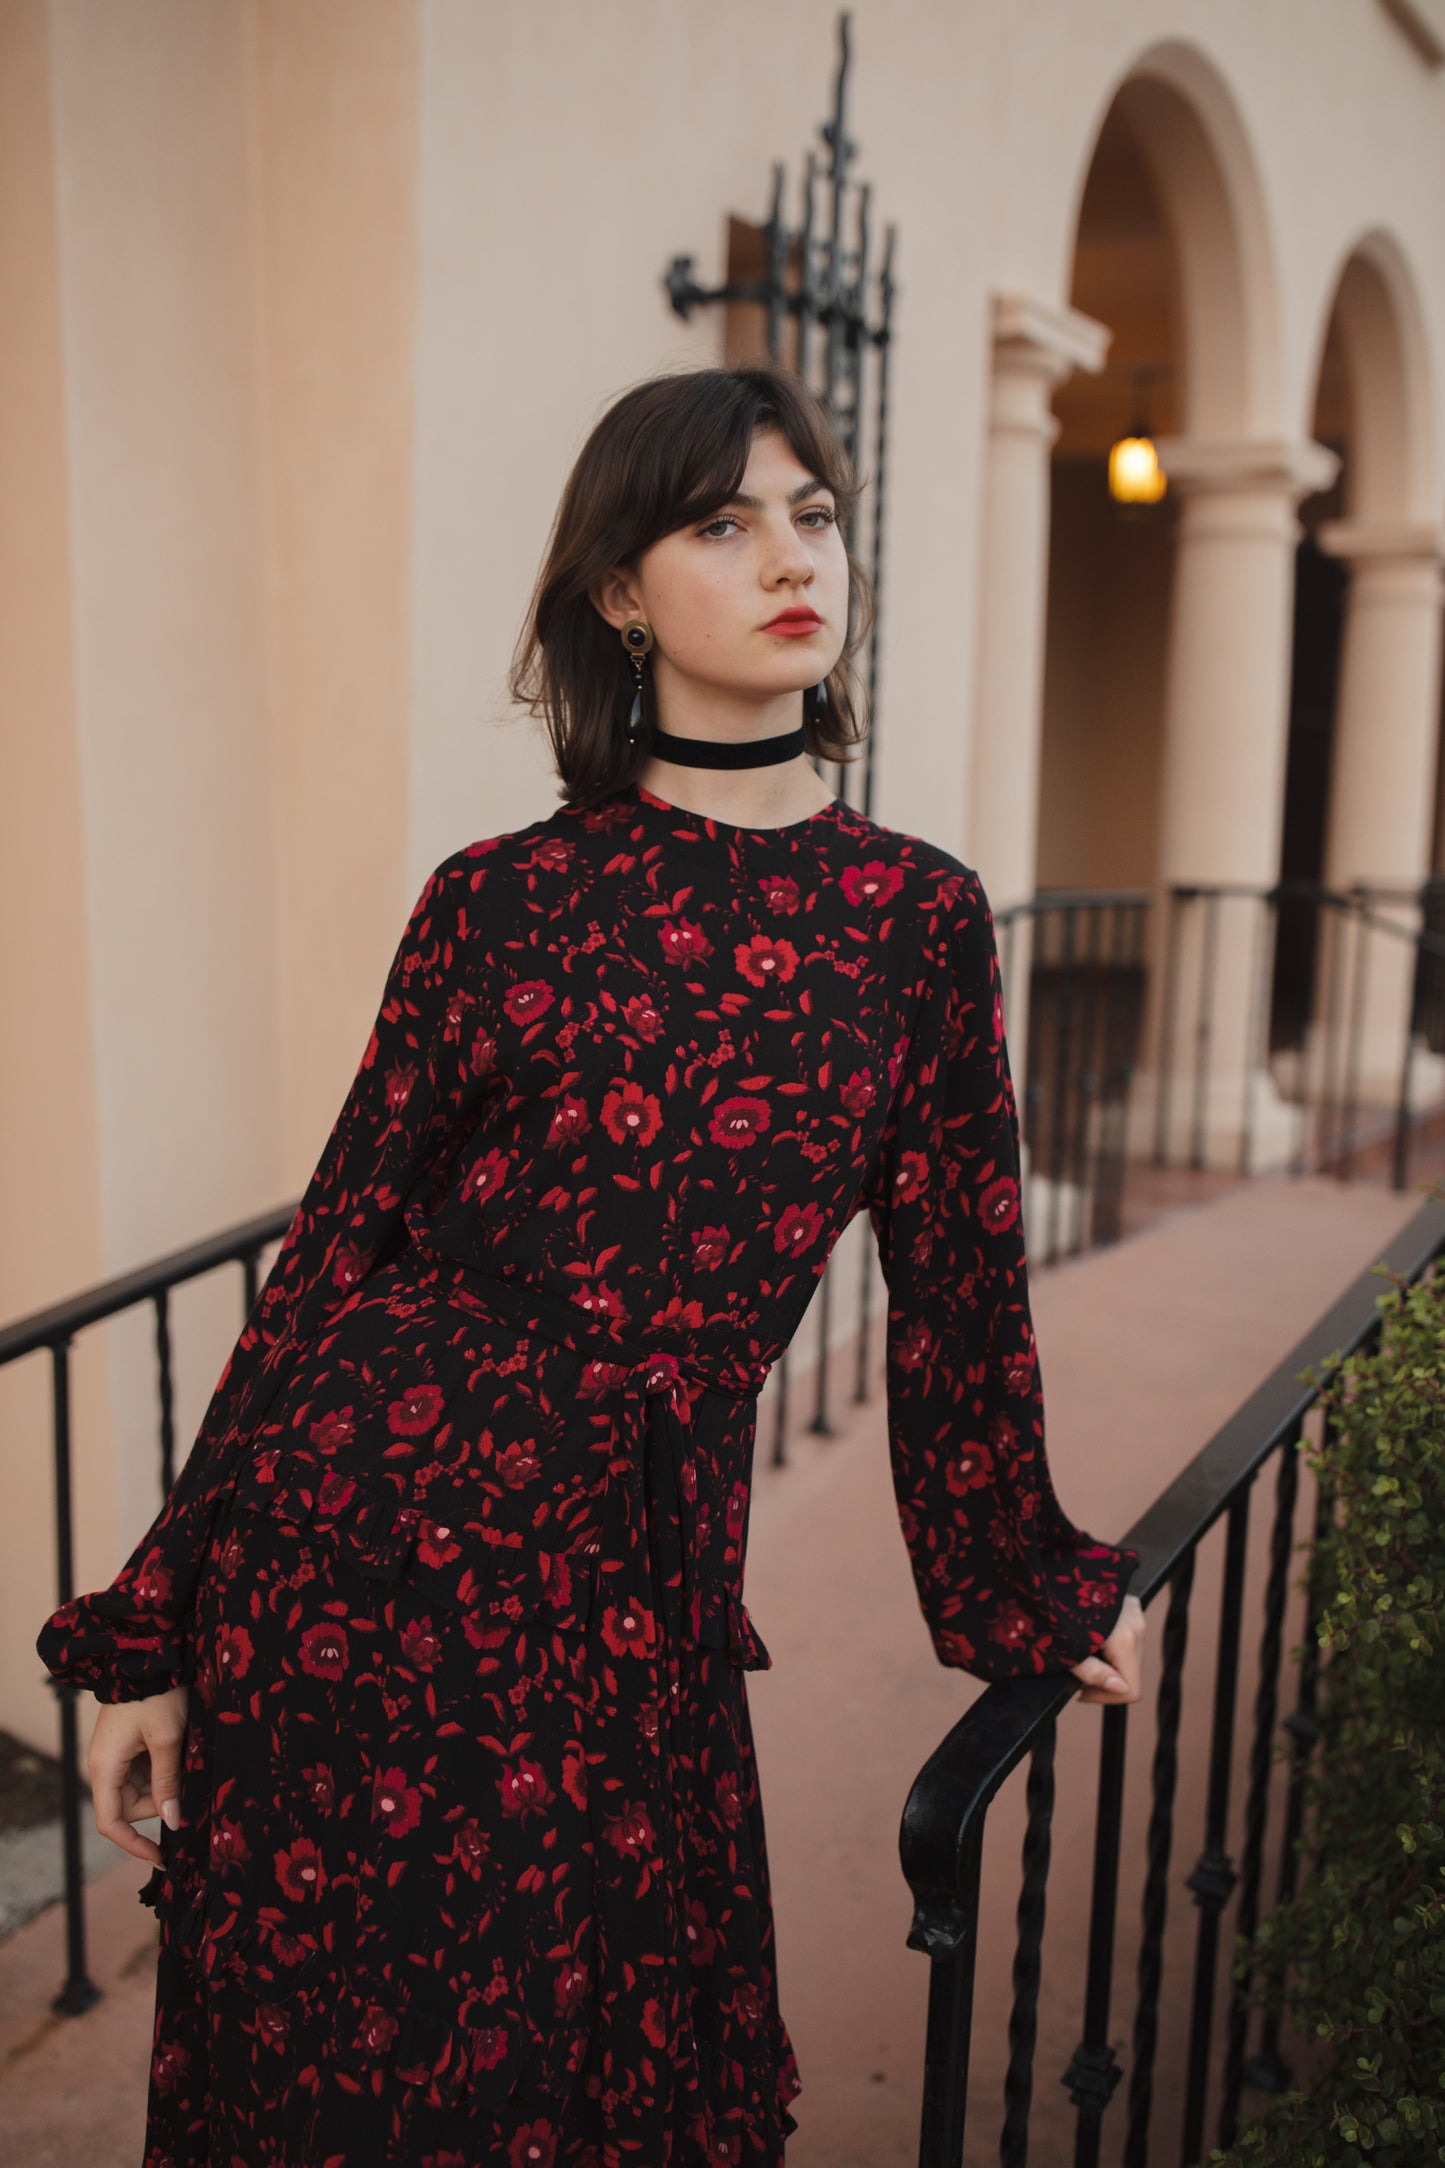 jennafer grace Vampira Love Maxi Dress black & scarlet red crimson floral long sleeve dress with high neck cinched waist tie bishop sleeve retro vintage goth gothic evening dress boho bohemian hippie romantic whimsical handmade in California USA